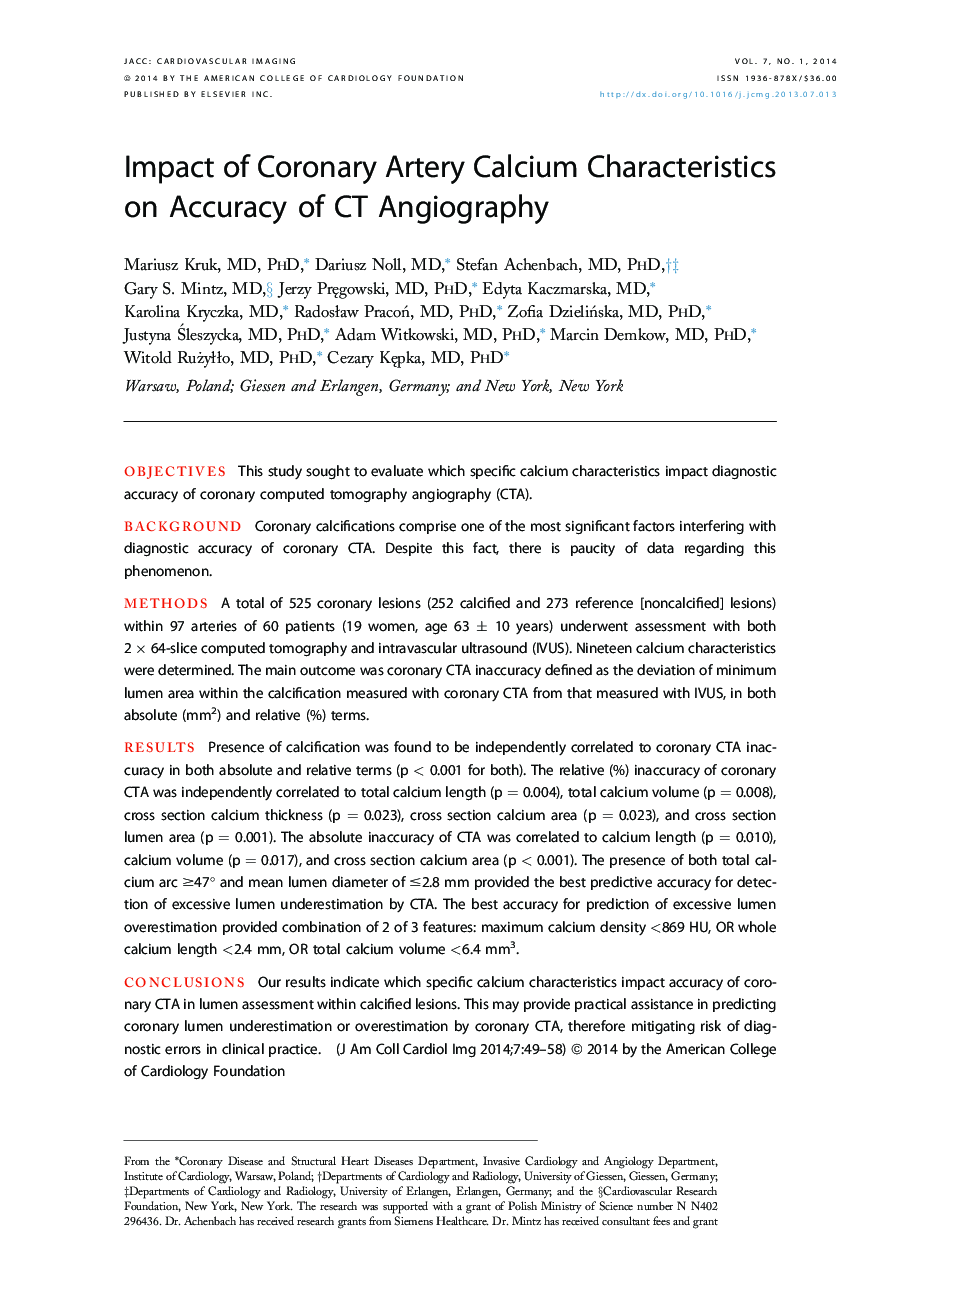 Impact of Coronary Artery Calcium Characteristics on Accuracy of CT Angiography 